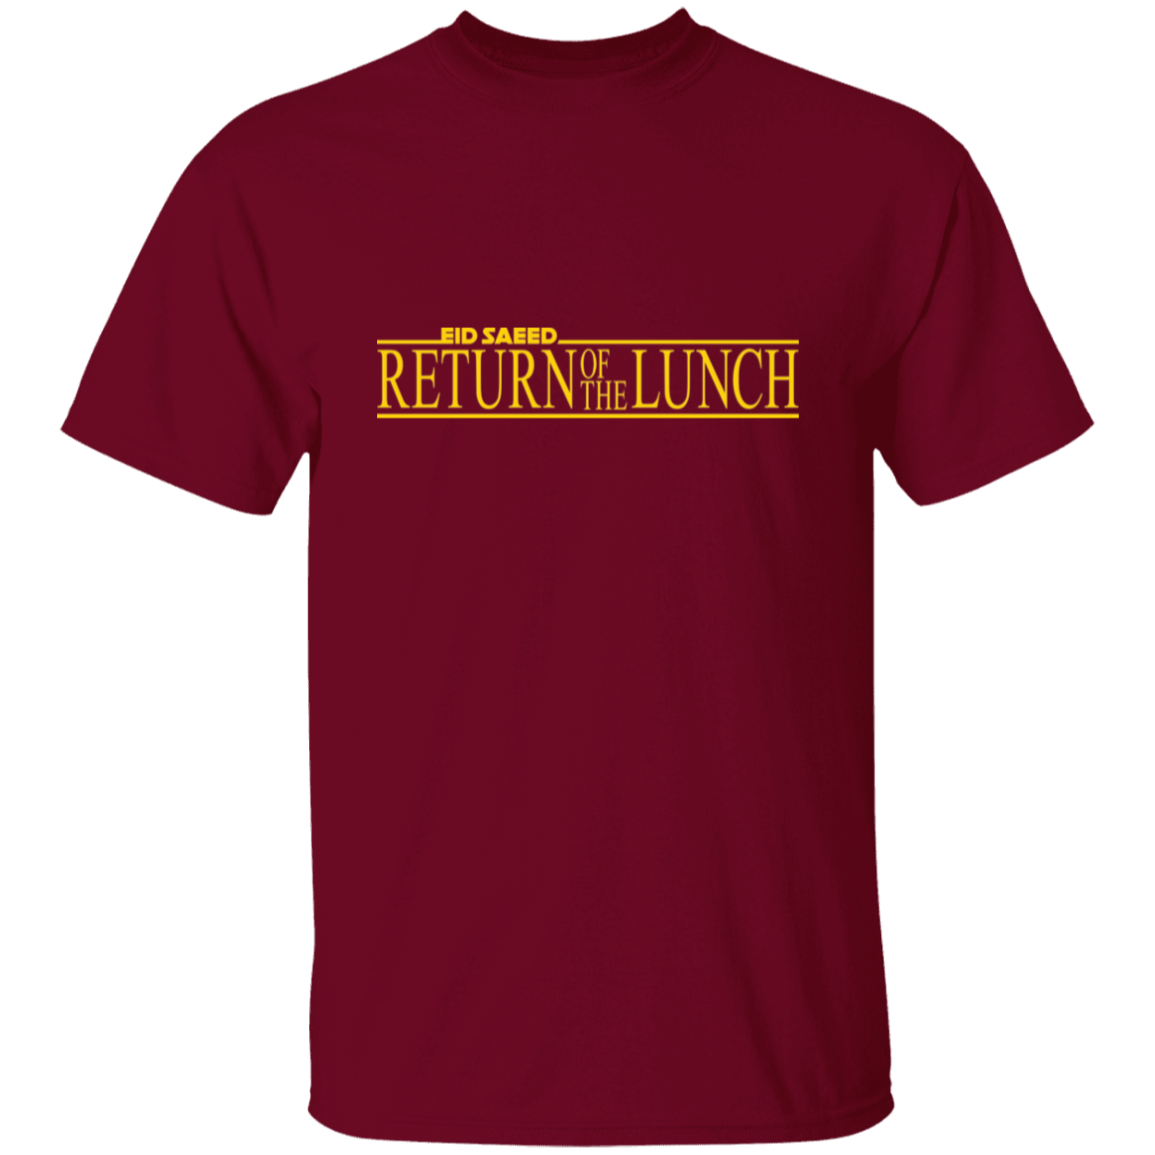 Return of the Lunch T-shirt